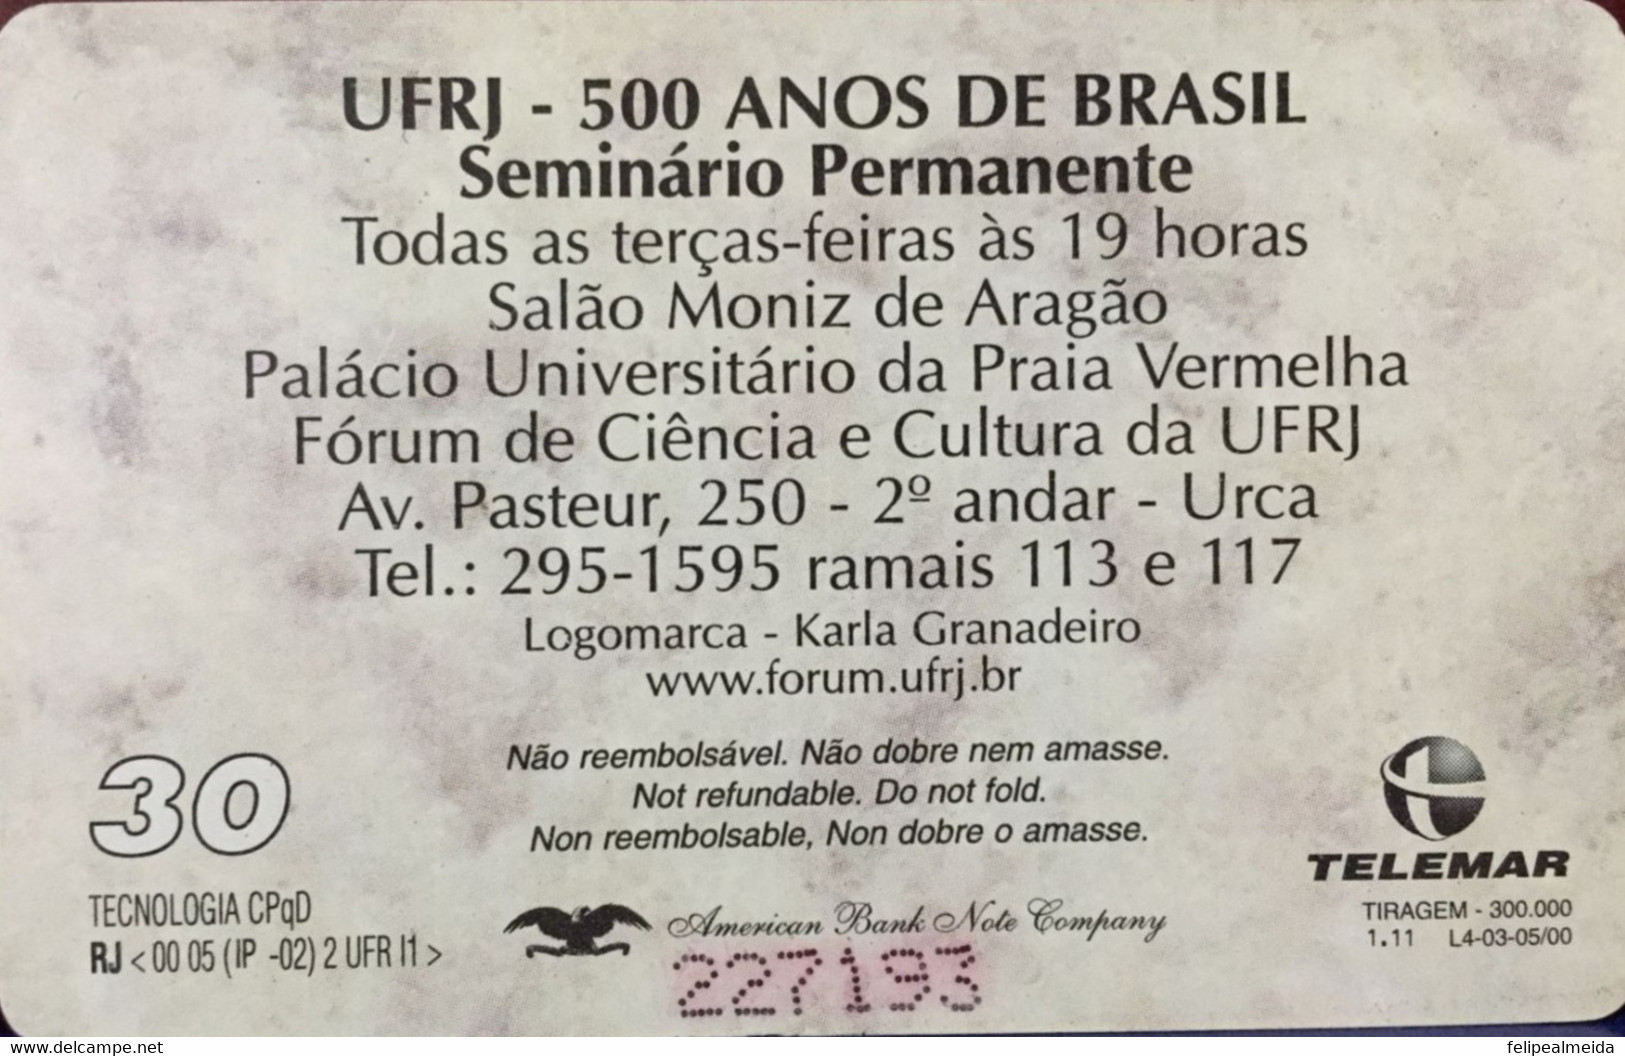 Phone Card Manufactured By Telemar In 2000 - 500 Years Of Brazil - Permanent Seminar - Science And Culture Forum - Feder - Cultura